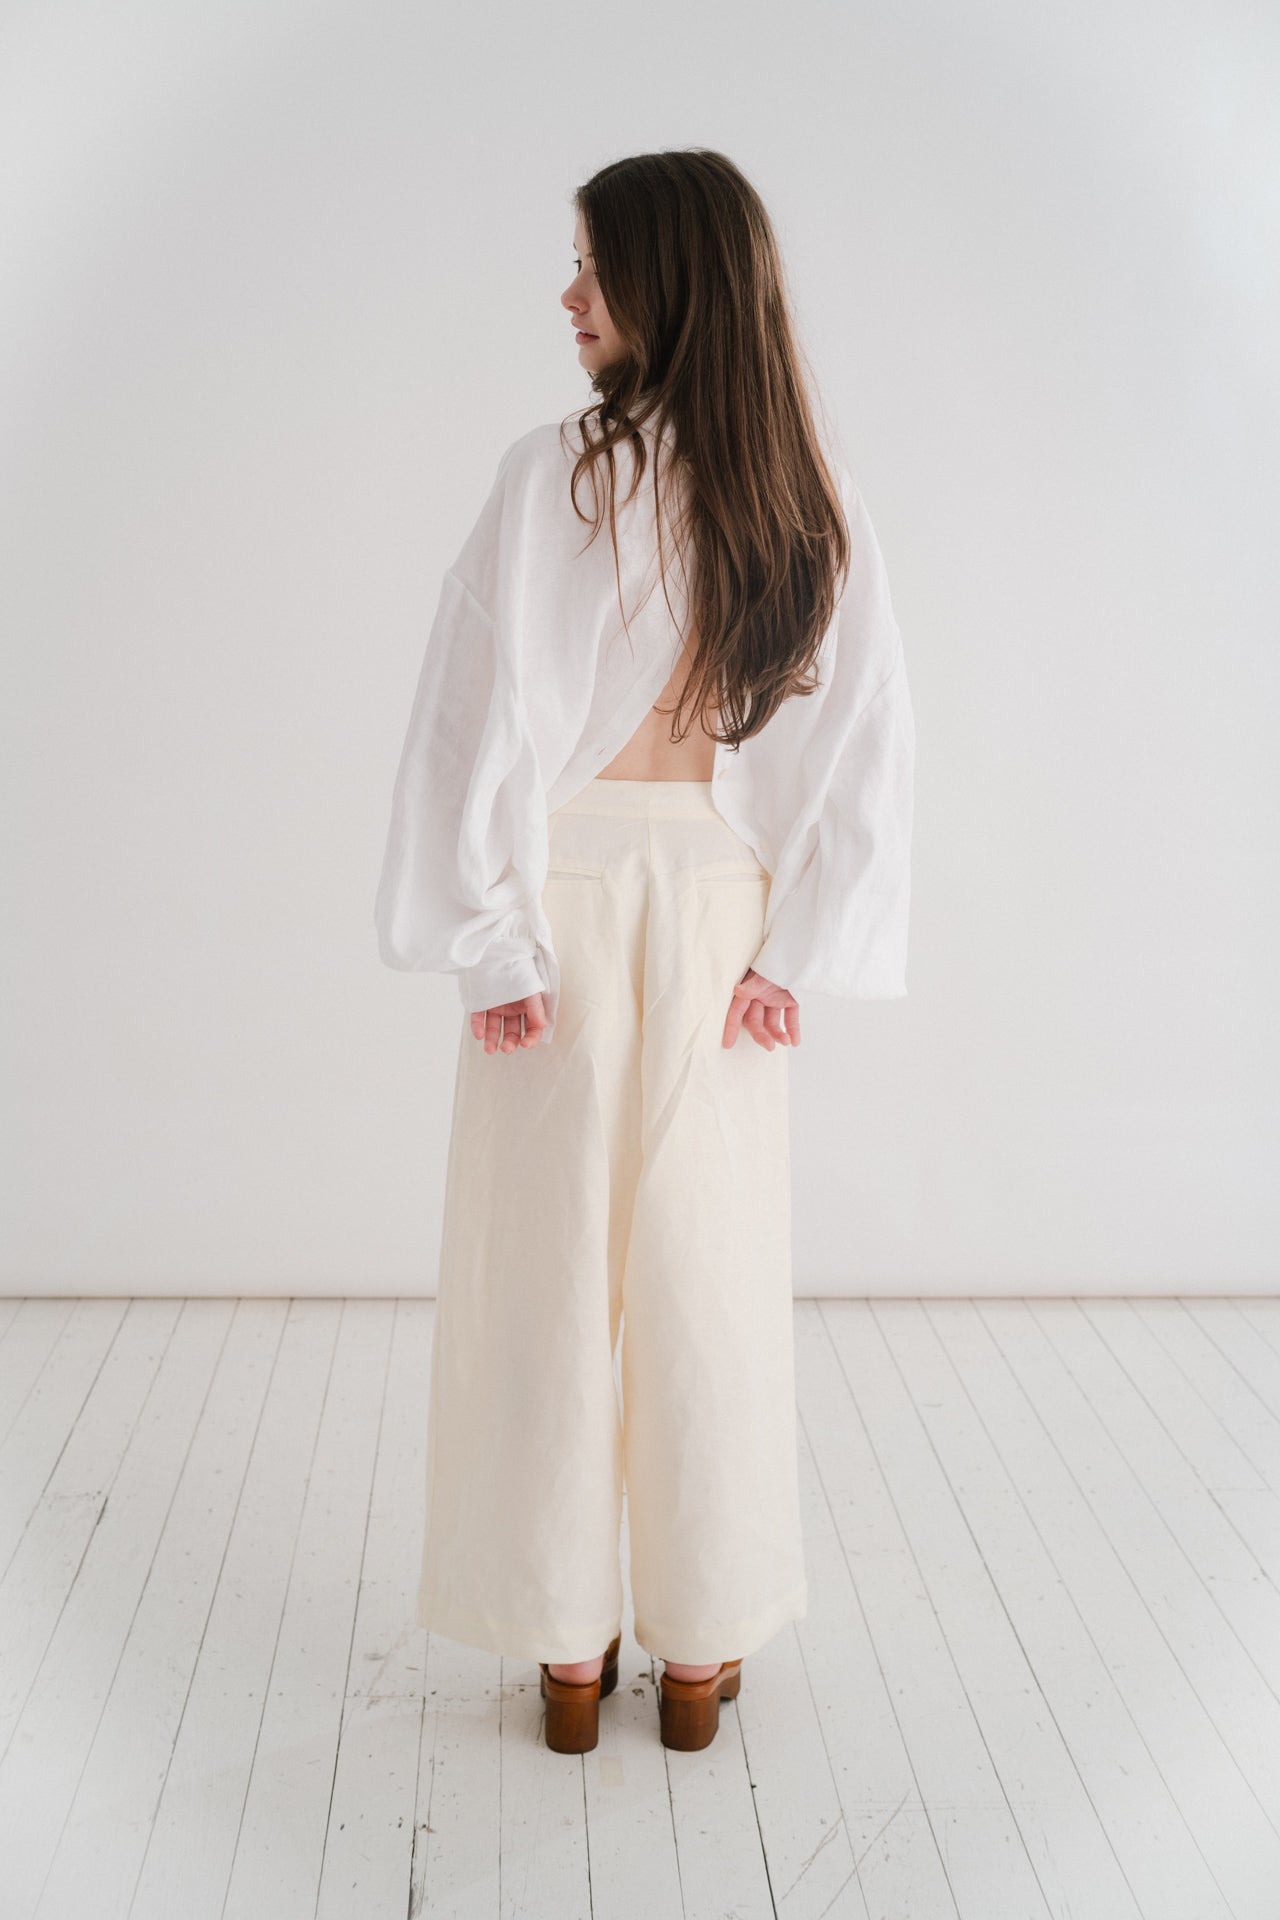 BOYFRIEND TROUSERS - TUSK | The Boyfriend Trouser - a new, more tailored piece for SS24. Cut with a dropped crotch and wide leg. Contrasted with a smart waistband and pleat detail, these are so wearable yet will make you feel really put together. They pai